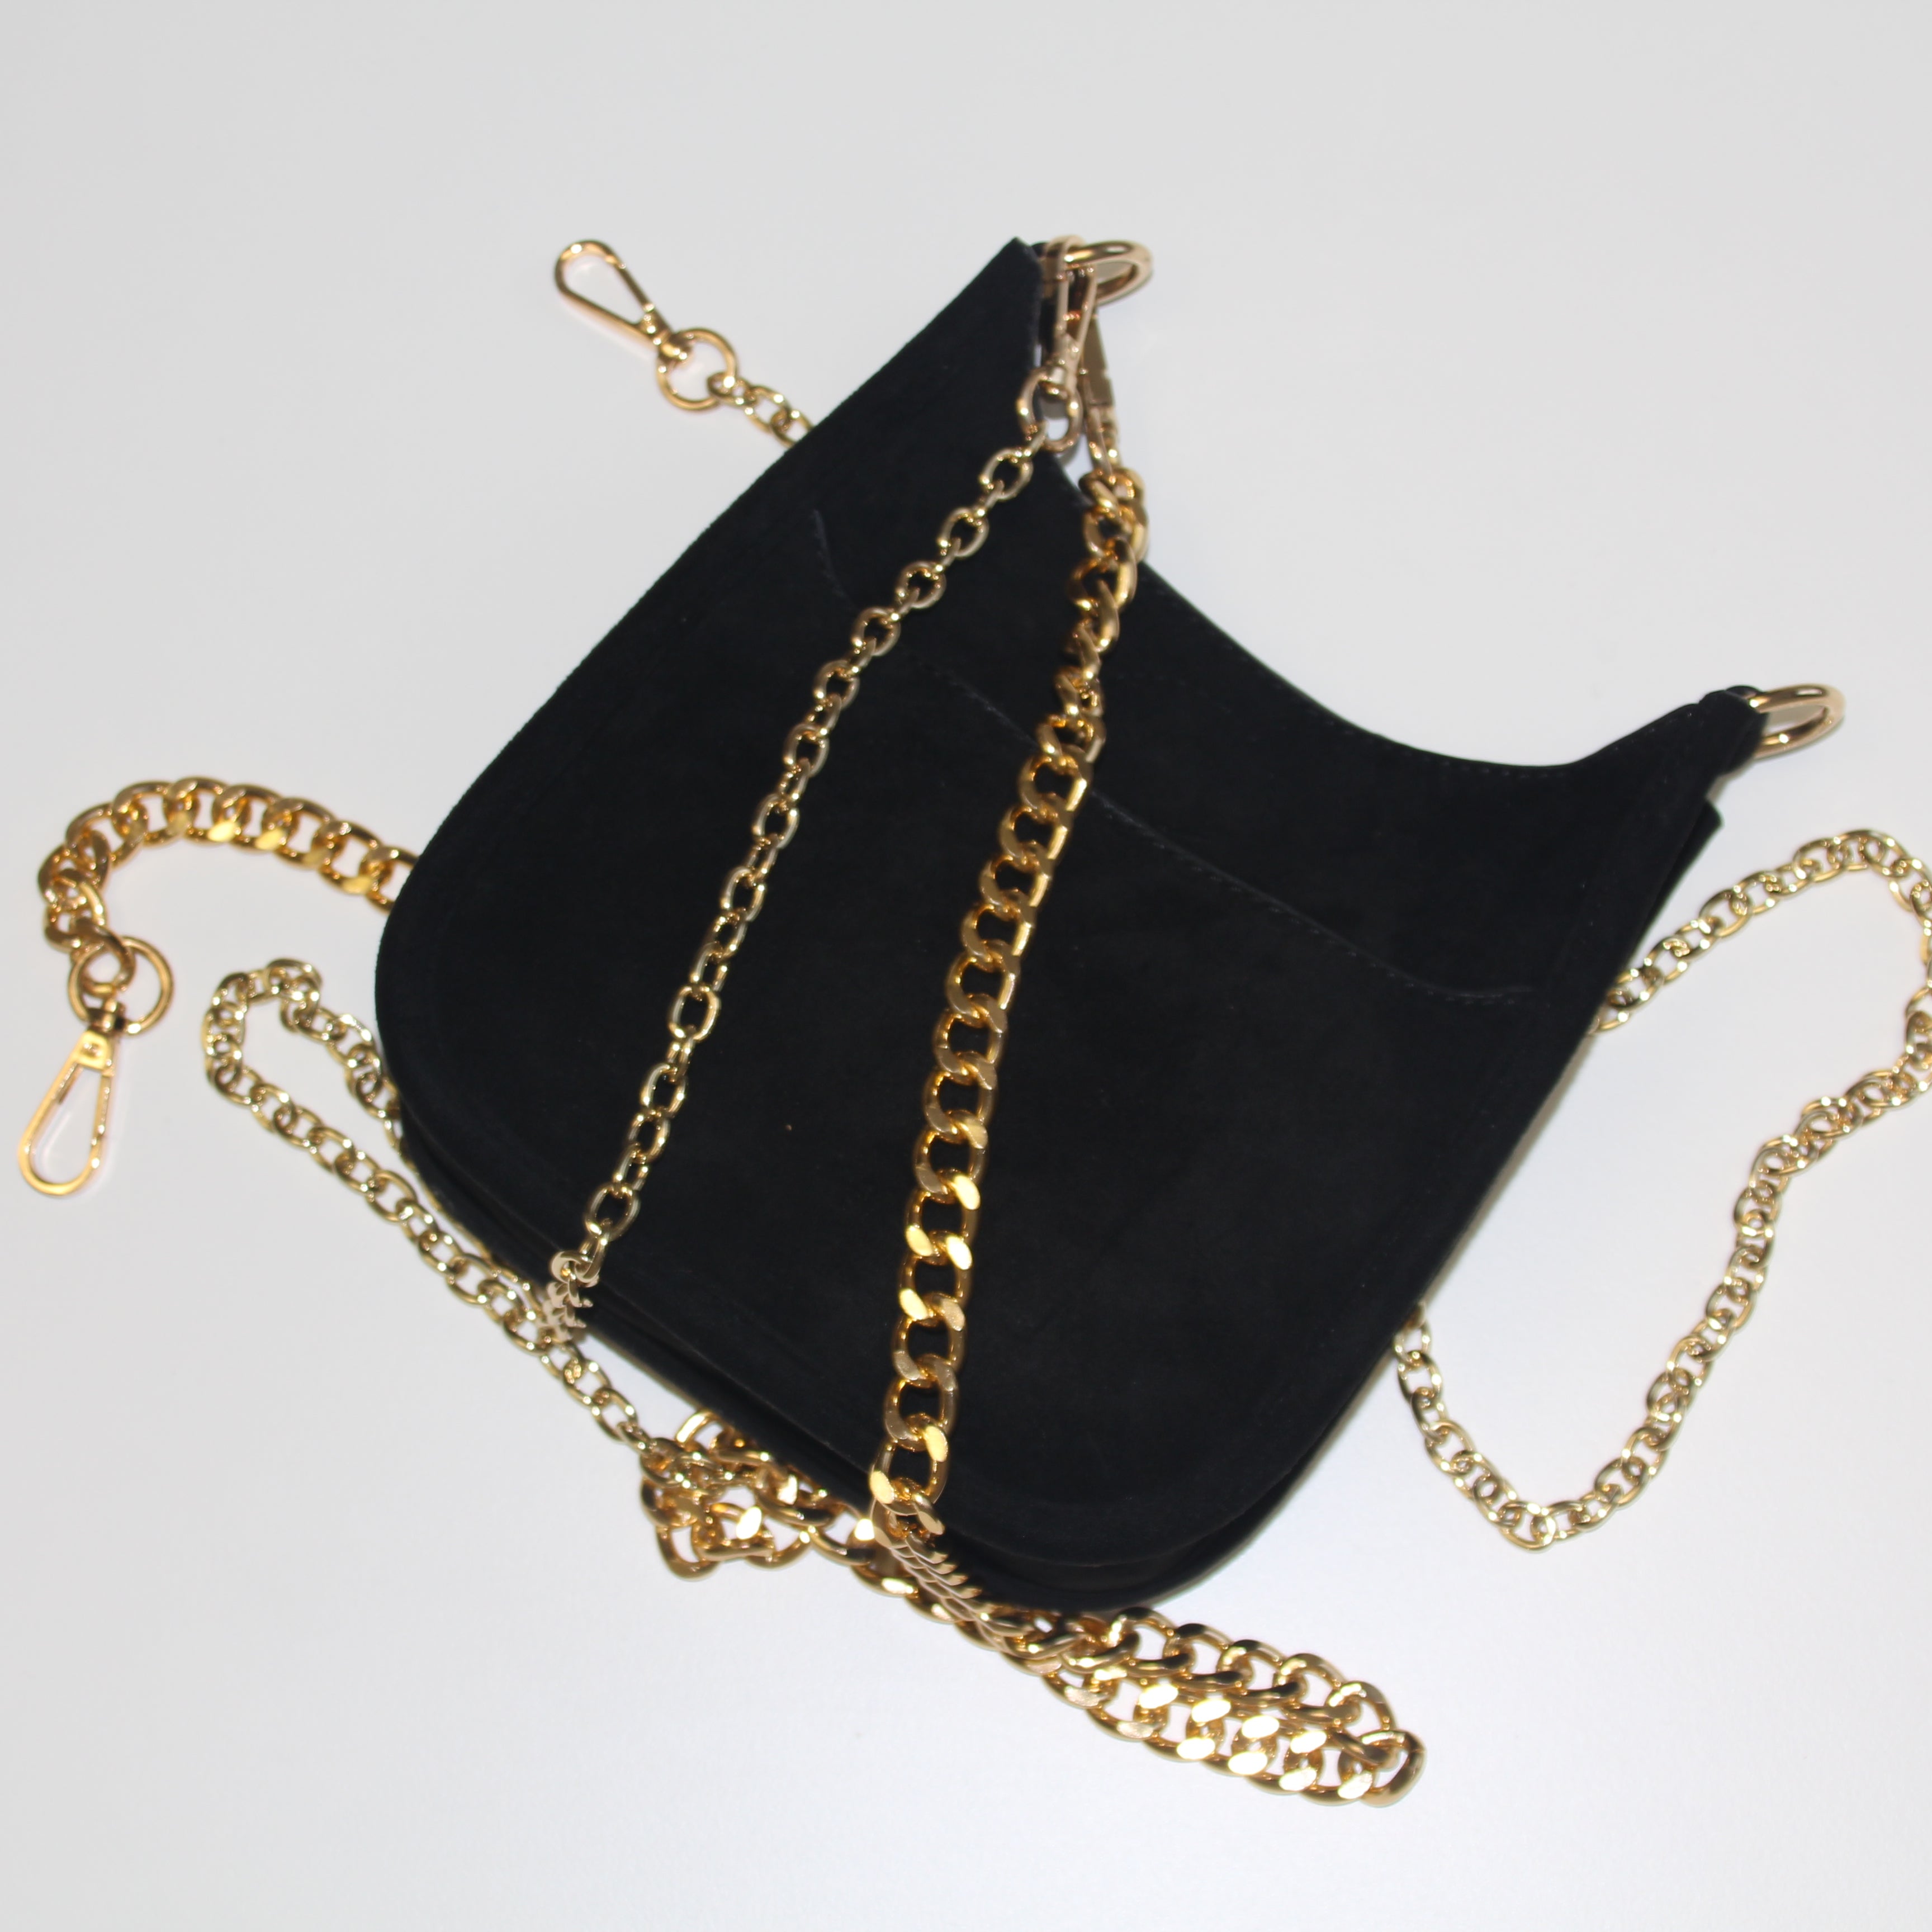 Black Messenger Bag with Gold Chain Strap